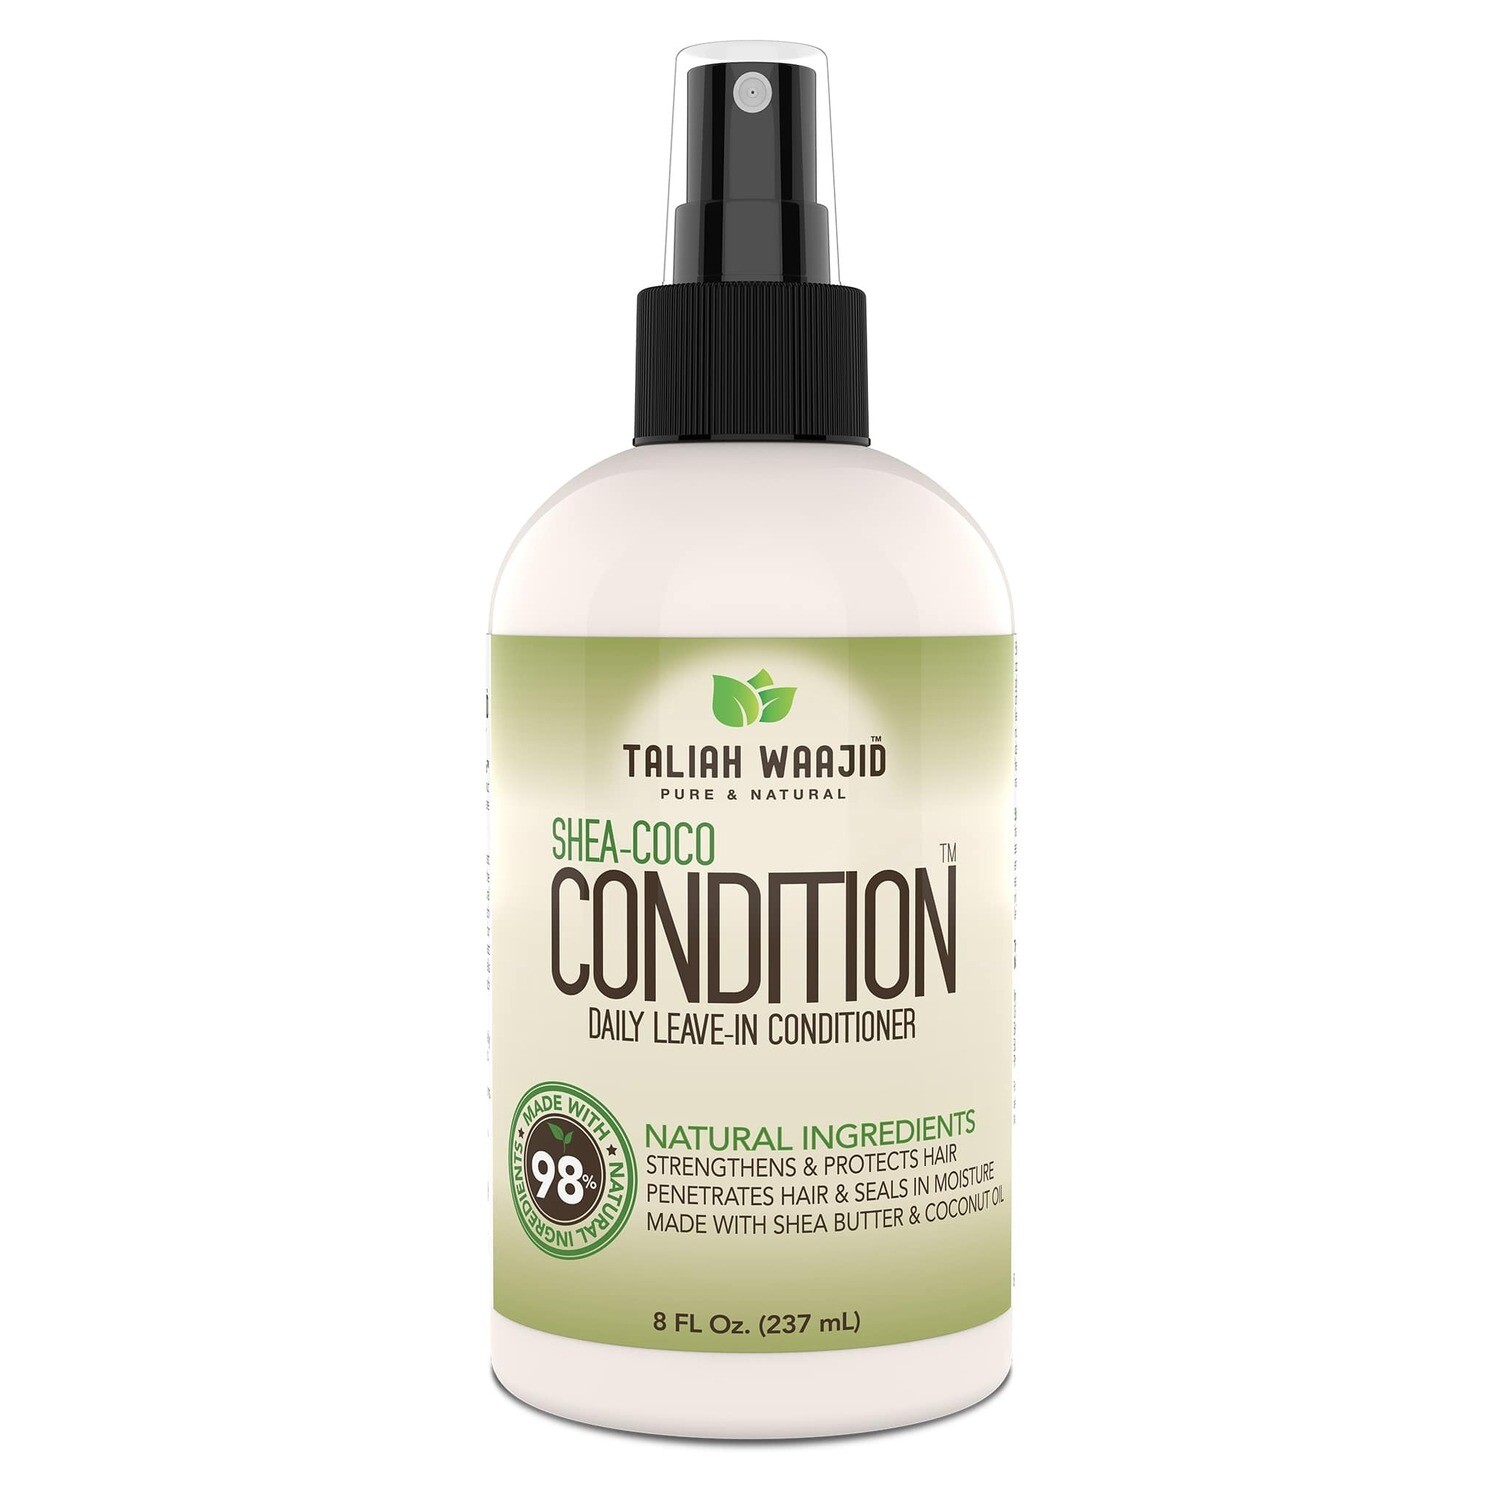 TALIAH WAAJID SHEA-COCO DAILY LEAVE IN CONDITIONER 8oz